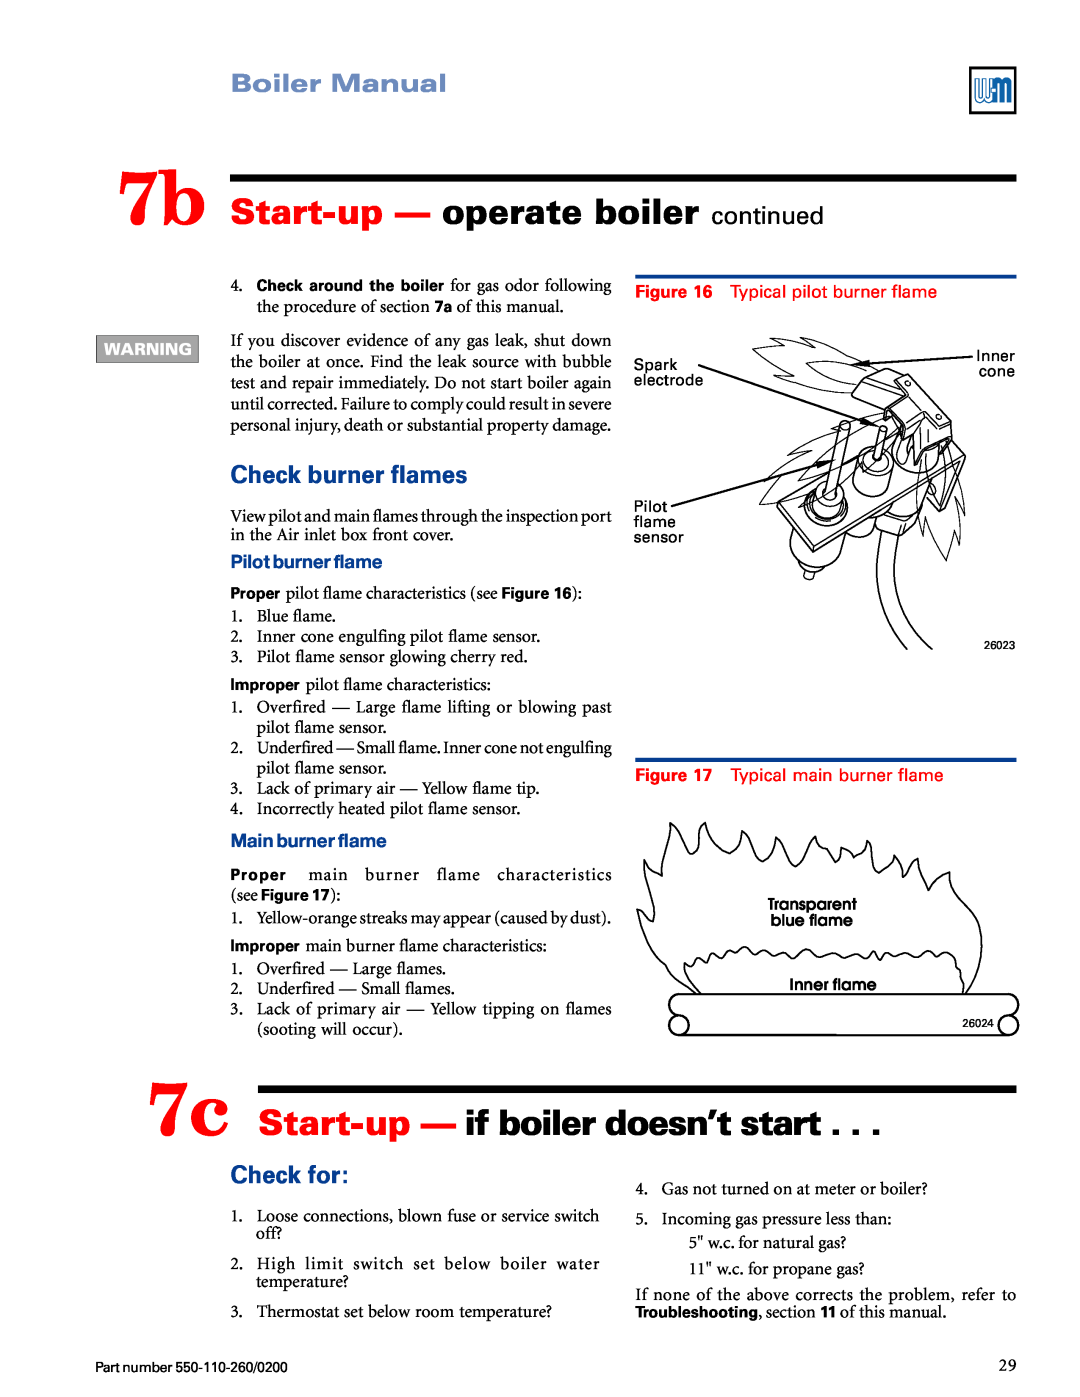 Weil-McLain 550-110-260/02002 manual 7b Start-up— operate boiler continued, 7c Start-up— if boiler doesn’t start, Check for 